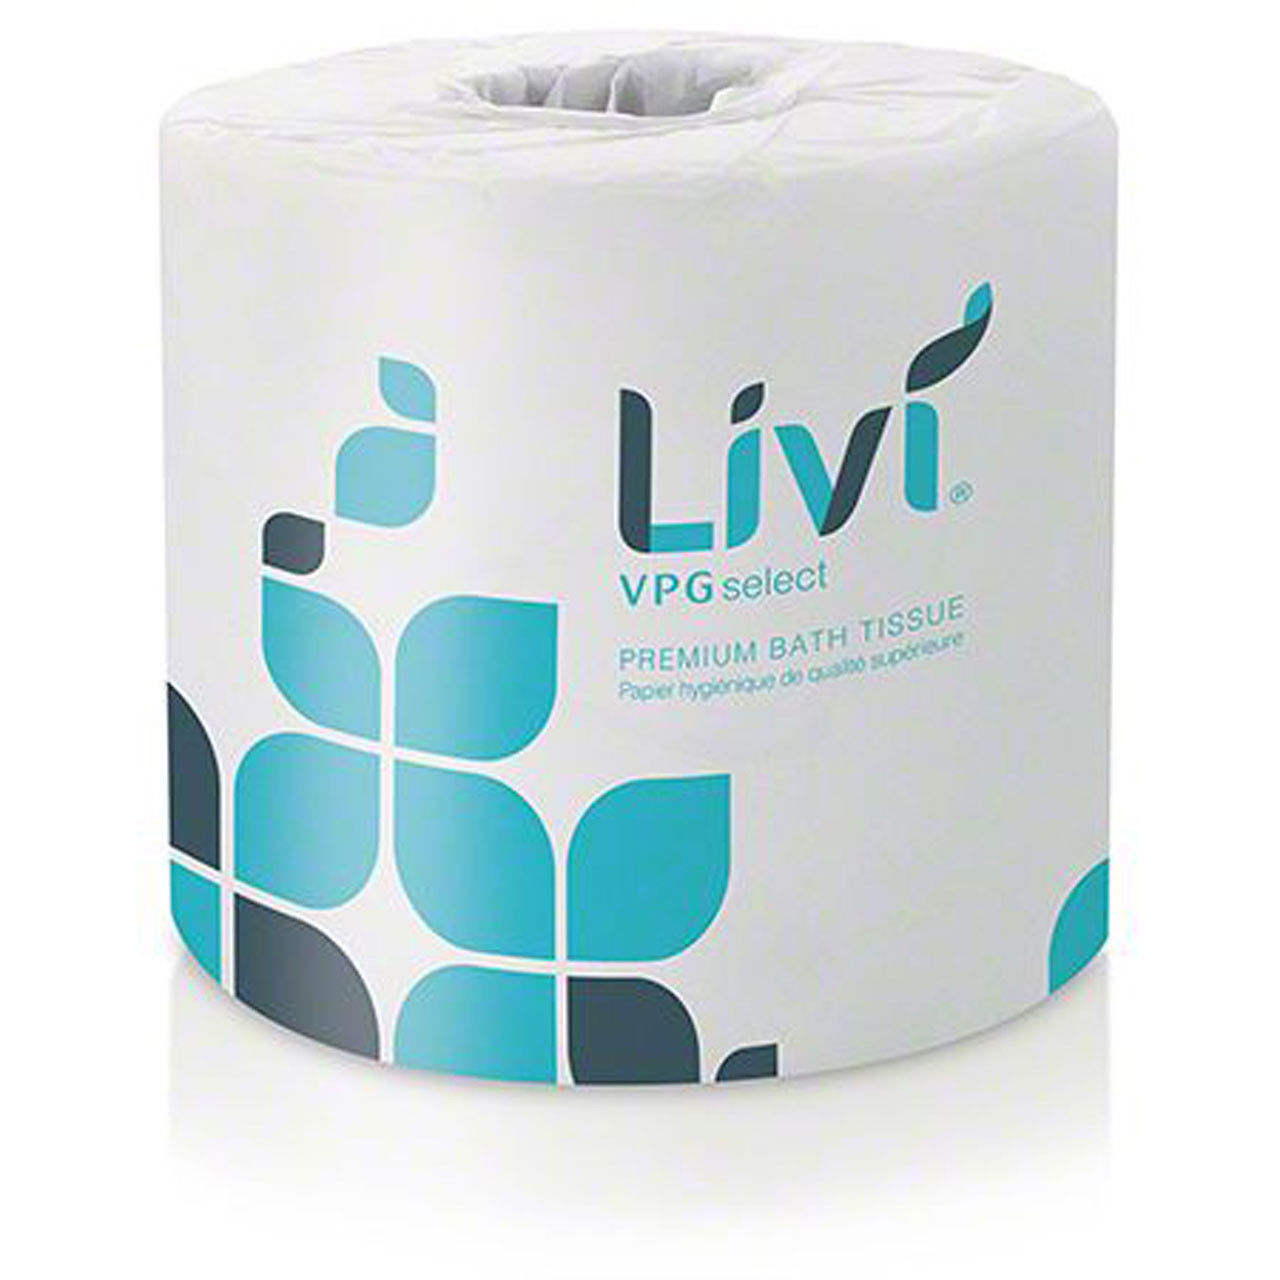 Where can the Solaris Paper Livi VPG Select Toilet Tissue 2/ply be used?